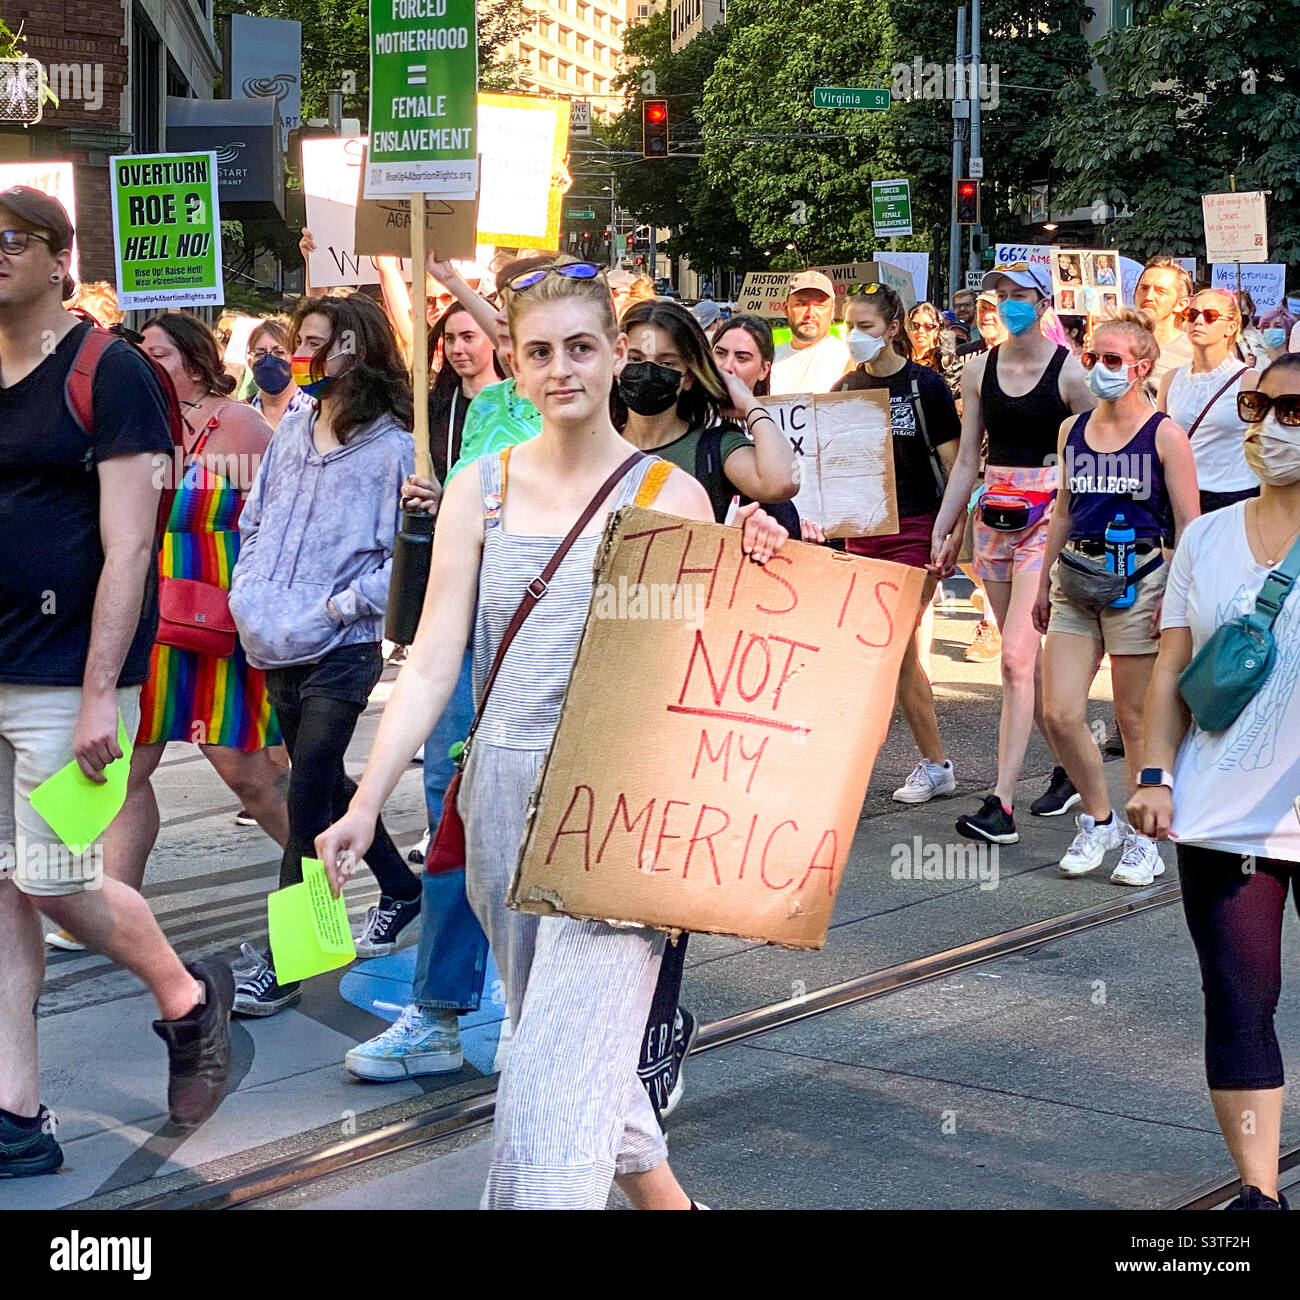 March in protest of the June 24, 2022 s Supteme Court decision to overturn Roe v Wade, thereby revoking the national right to abortions. Seattle, Washington, June 25, 2022 Stock Photo